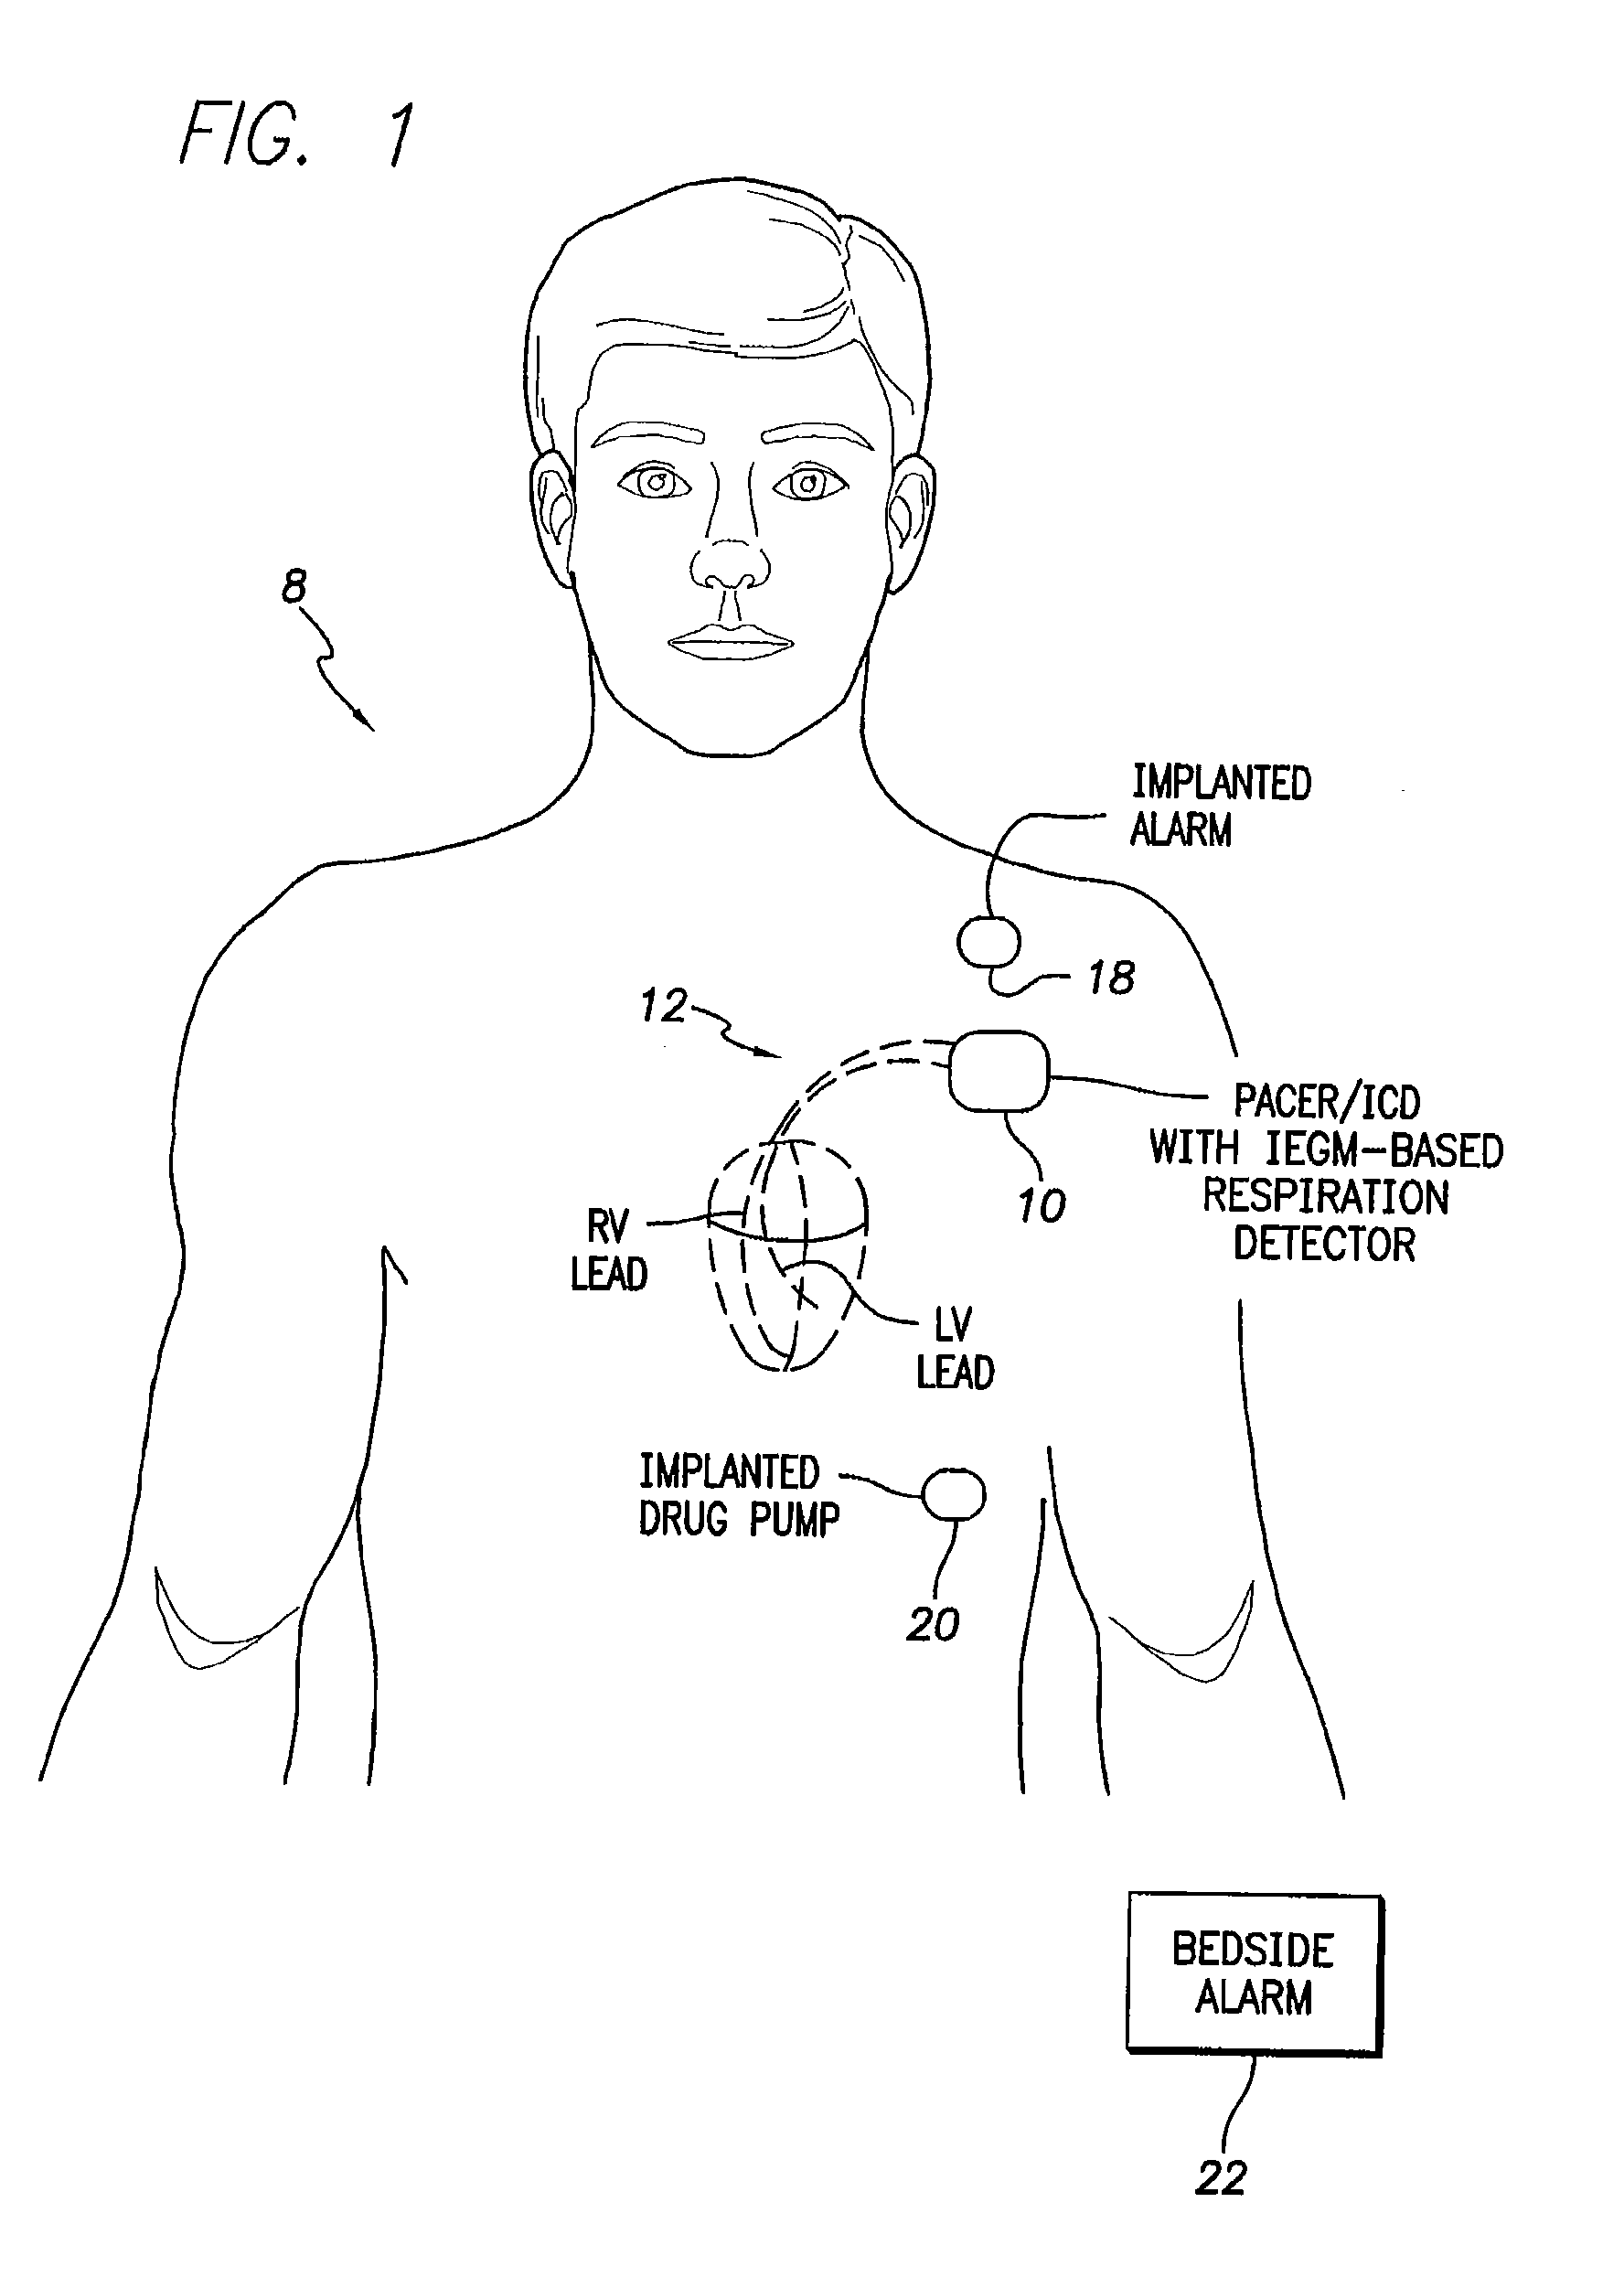 System and method for detecting abnormal respiration based on intracardiac electrogram signals using a pattern recognition device